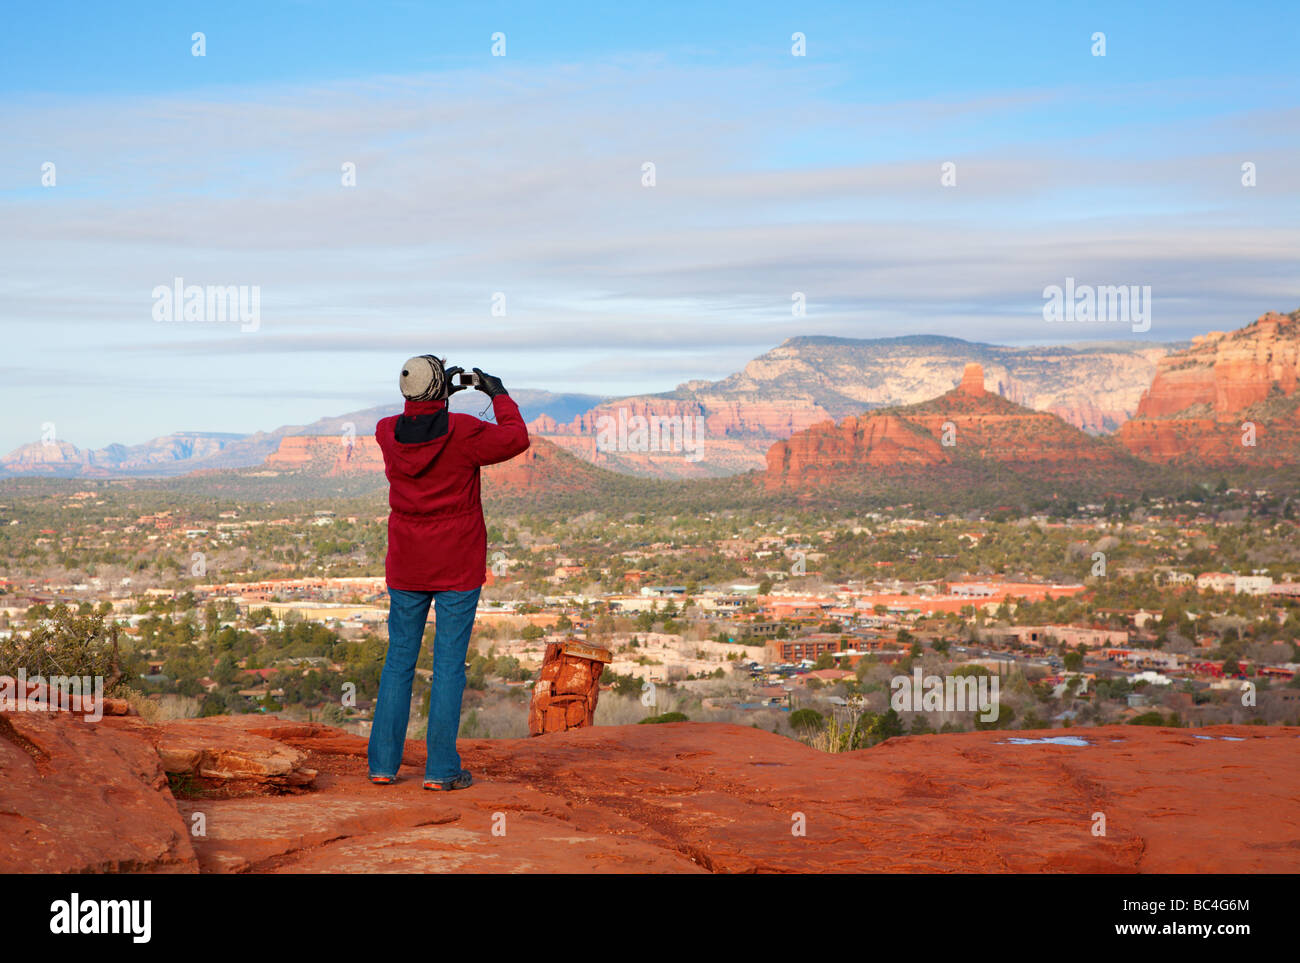 A tourist is taking picture of scenic Red Rocks in Sedona Arizona Stock Photo